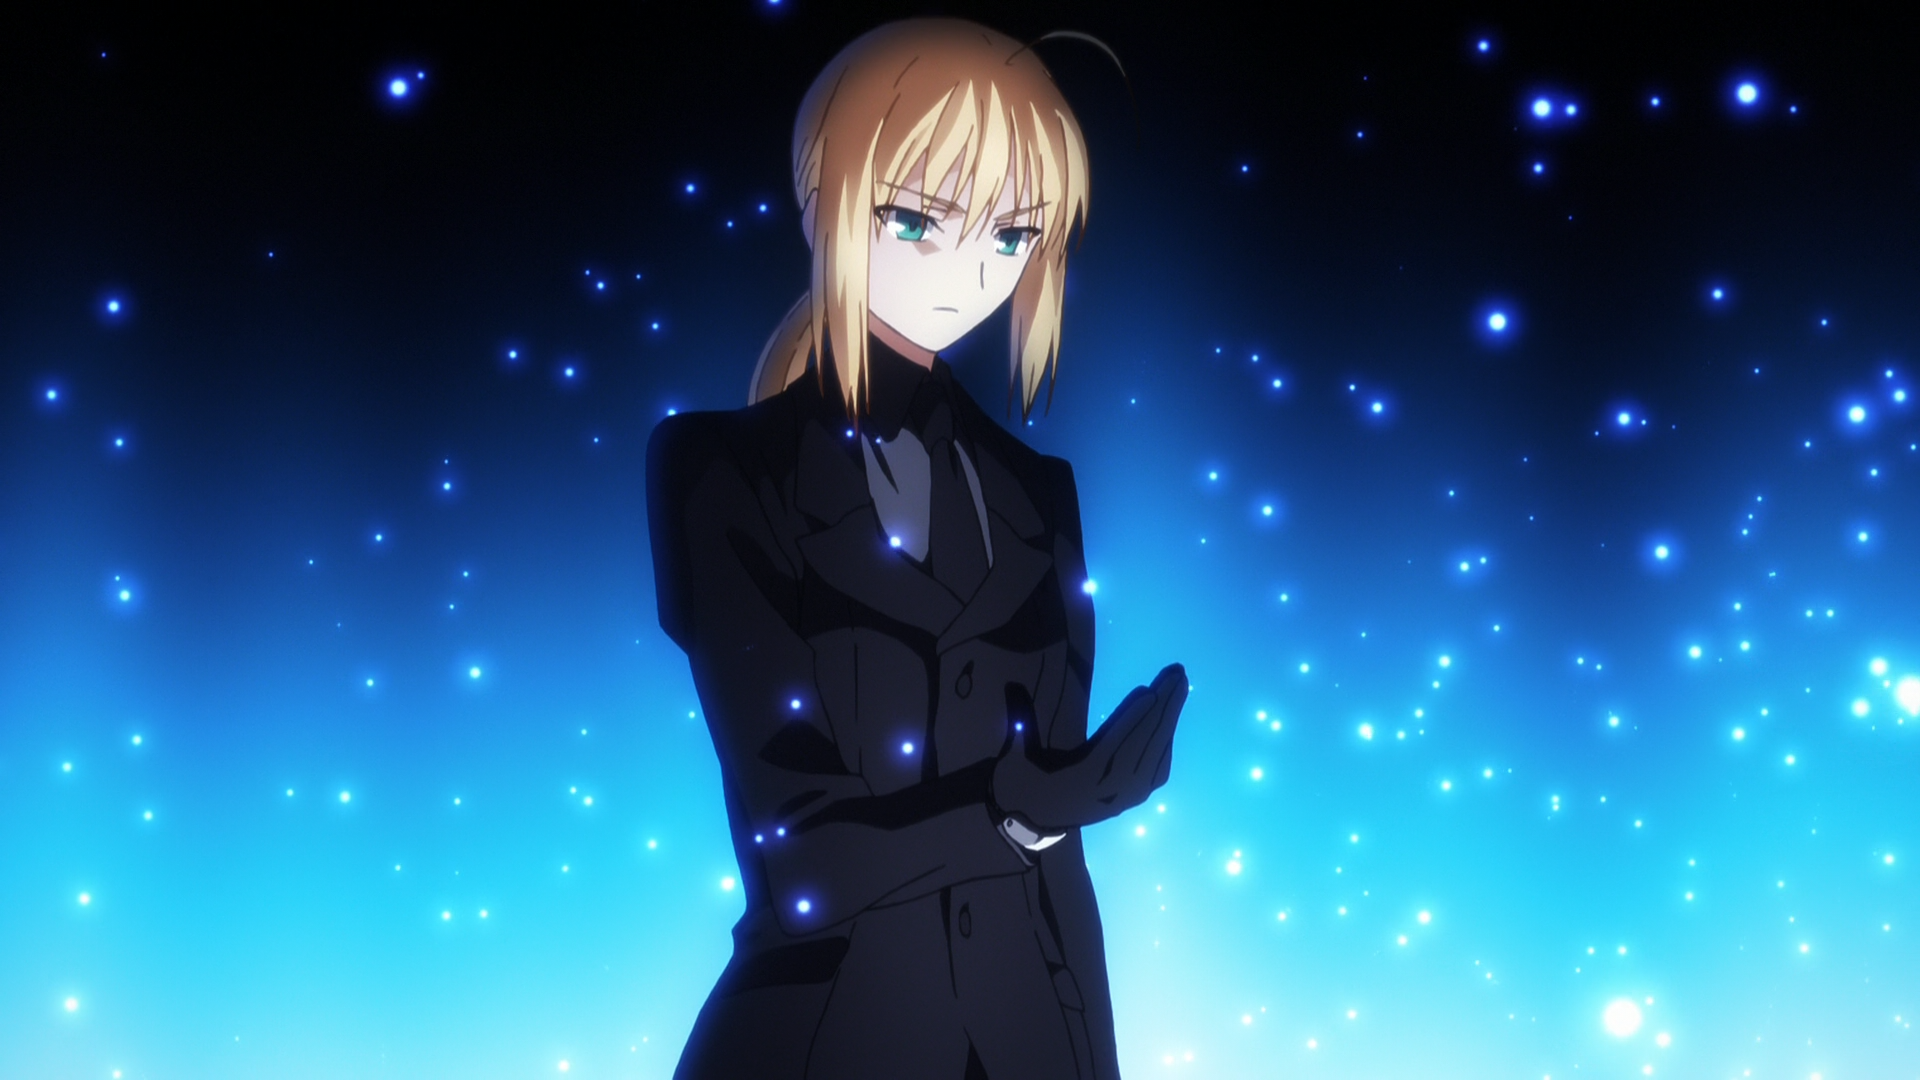 Anime 1920x1080 Saber anime girls anime Fate/Zero blonde green eyes lights standing tie Fate series suit and tie